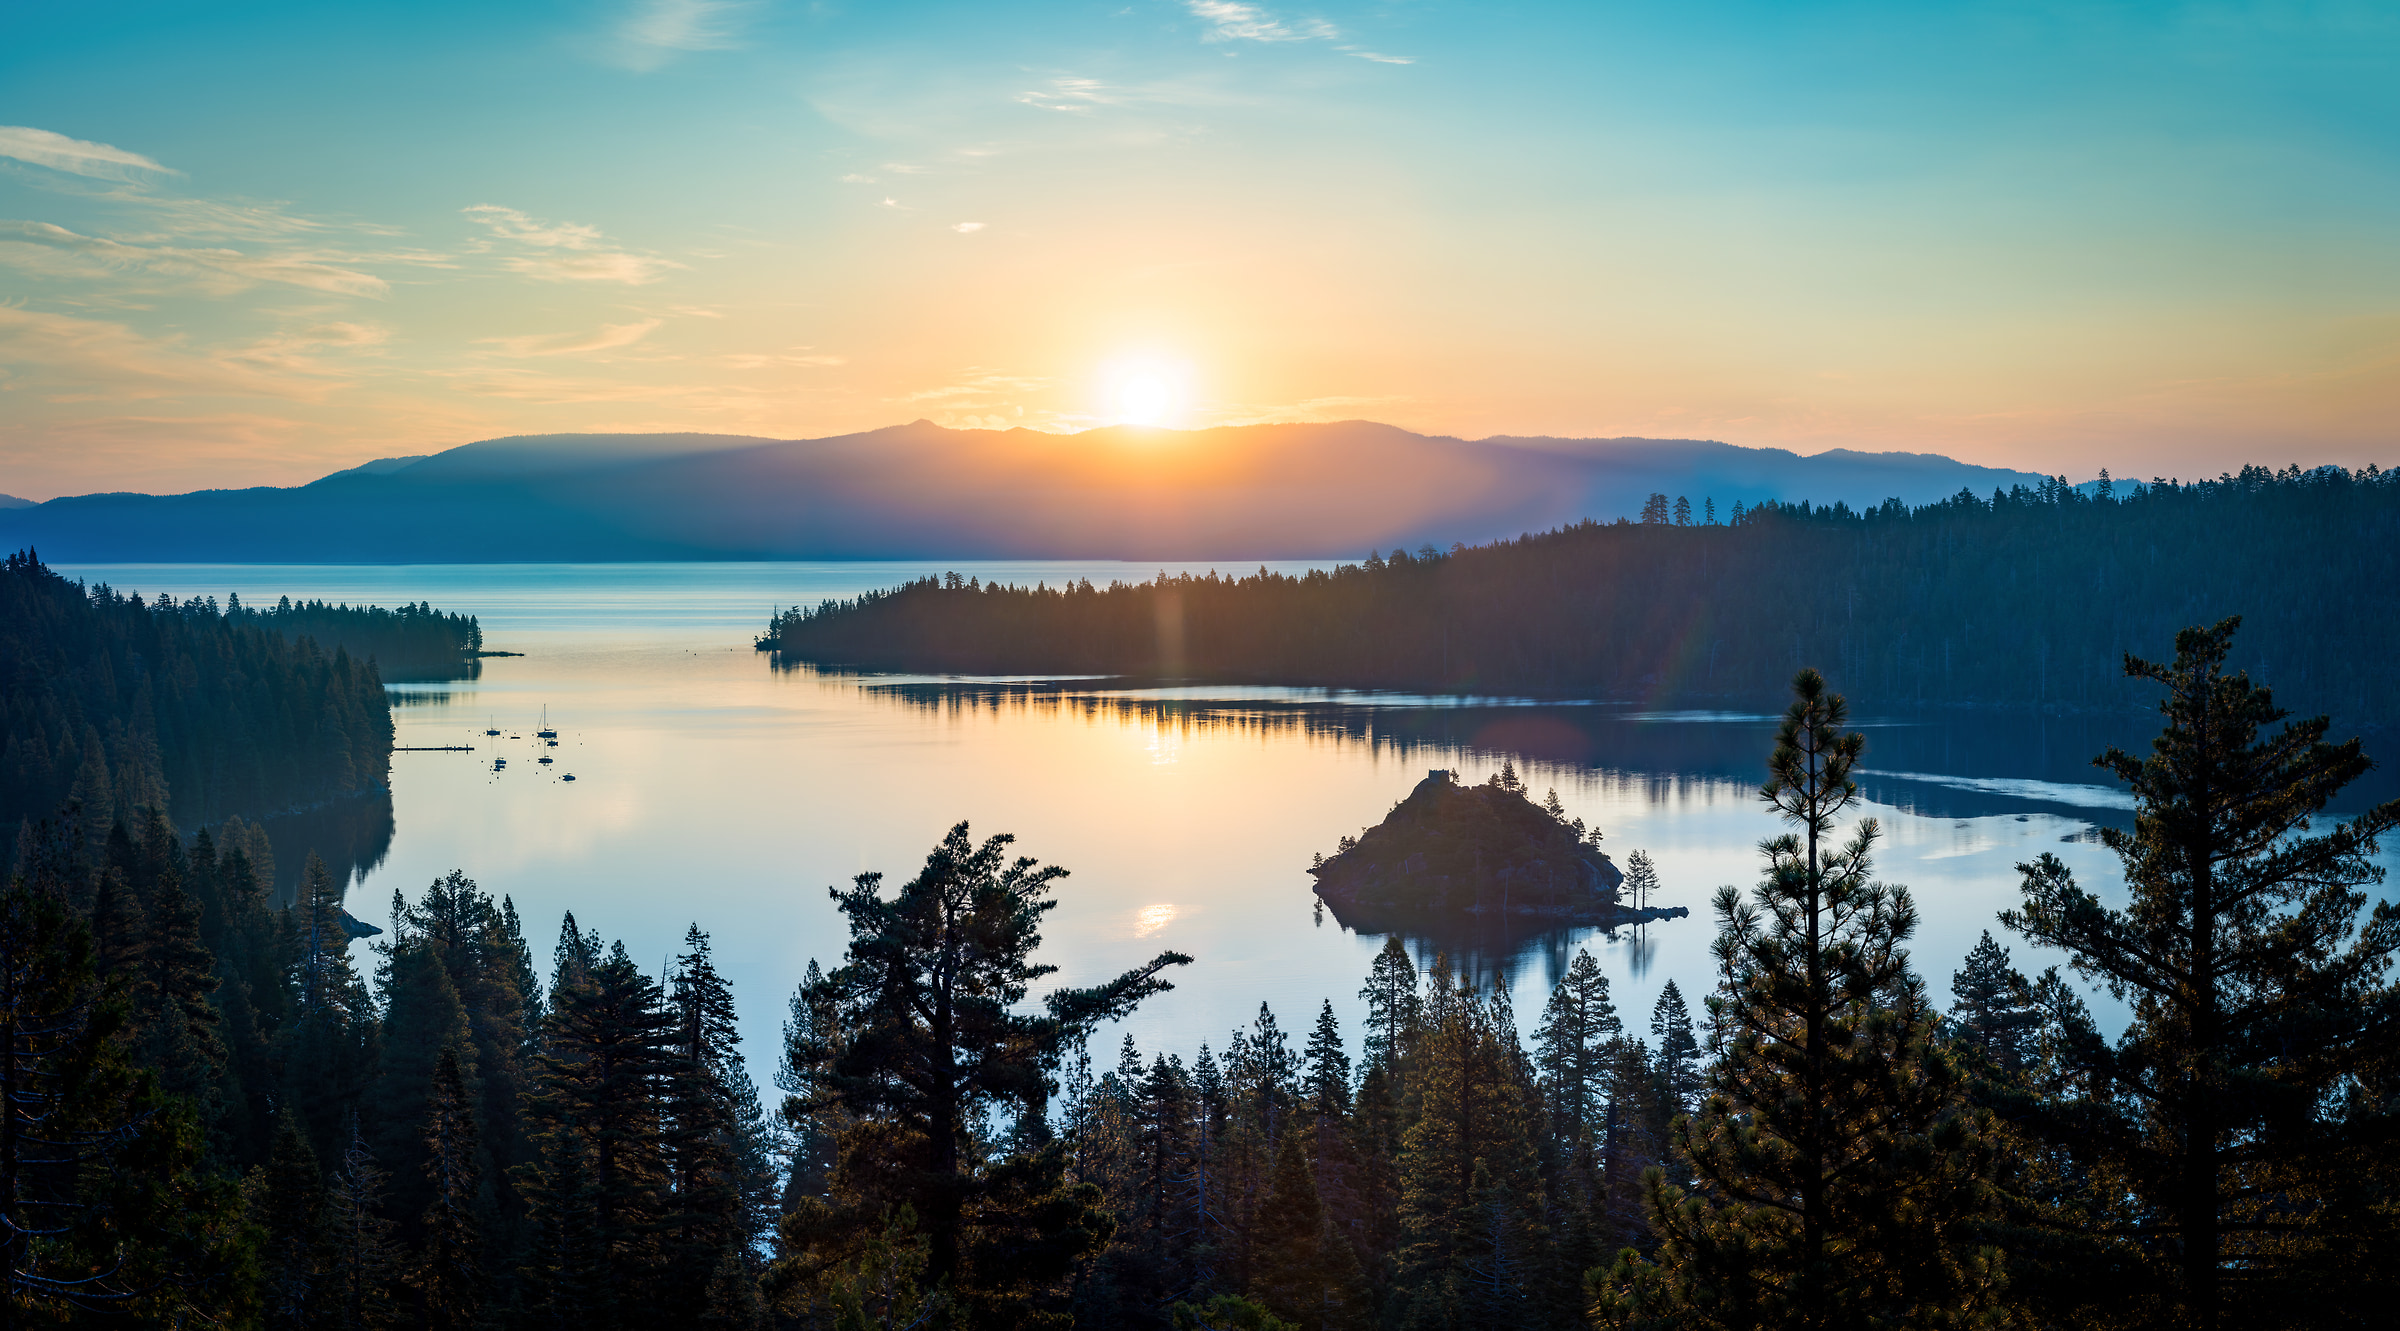 471 megapixels! A very high resolution, large-format VAST photo print of a sunrise over a lake; landscape photograph created by Justin Katz in Emerald Bay, Lake Tahoe, California